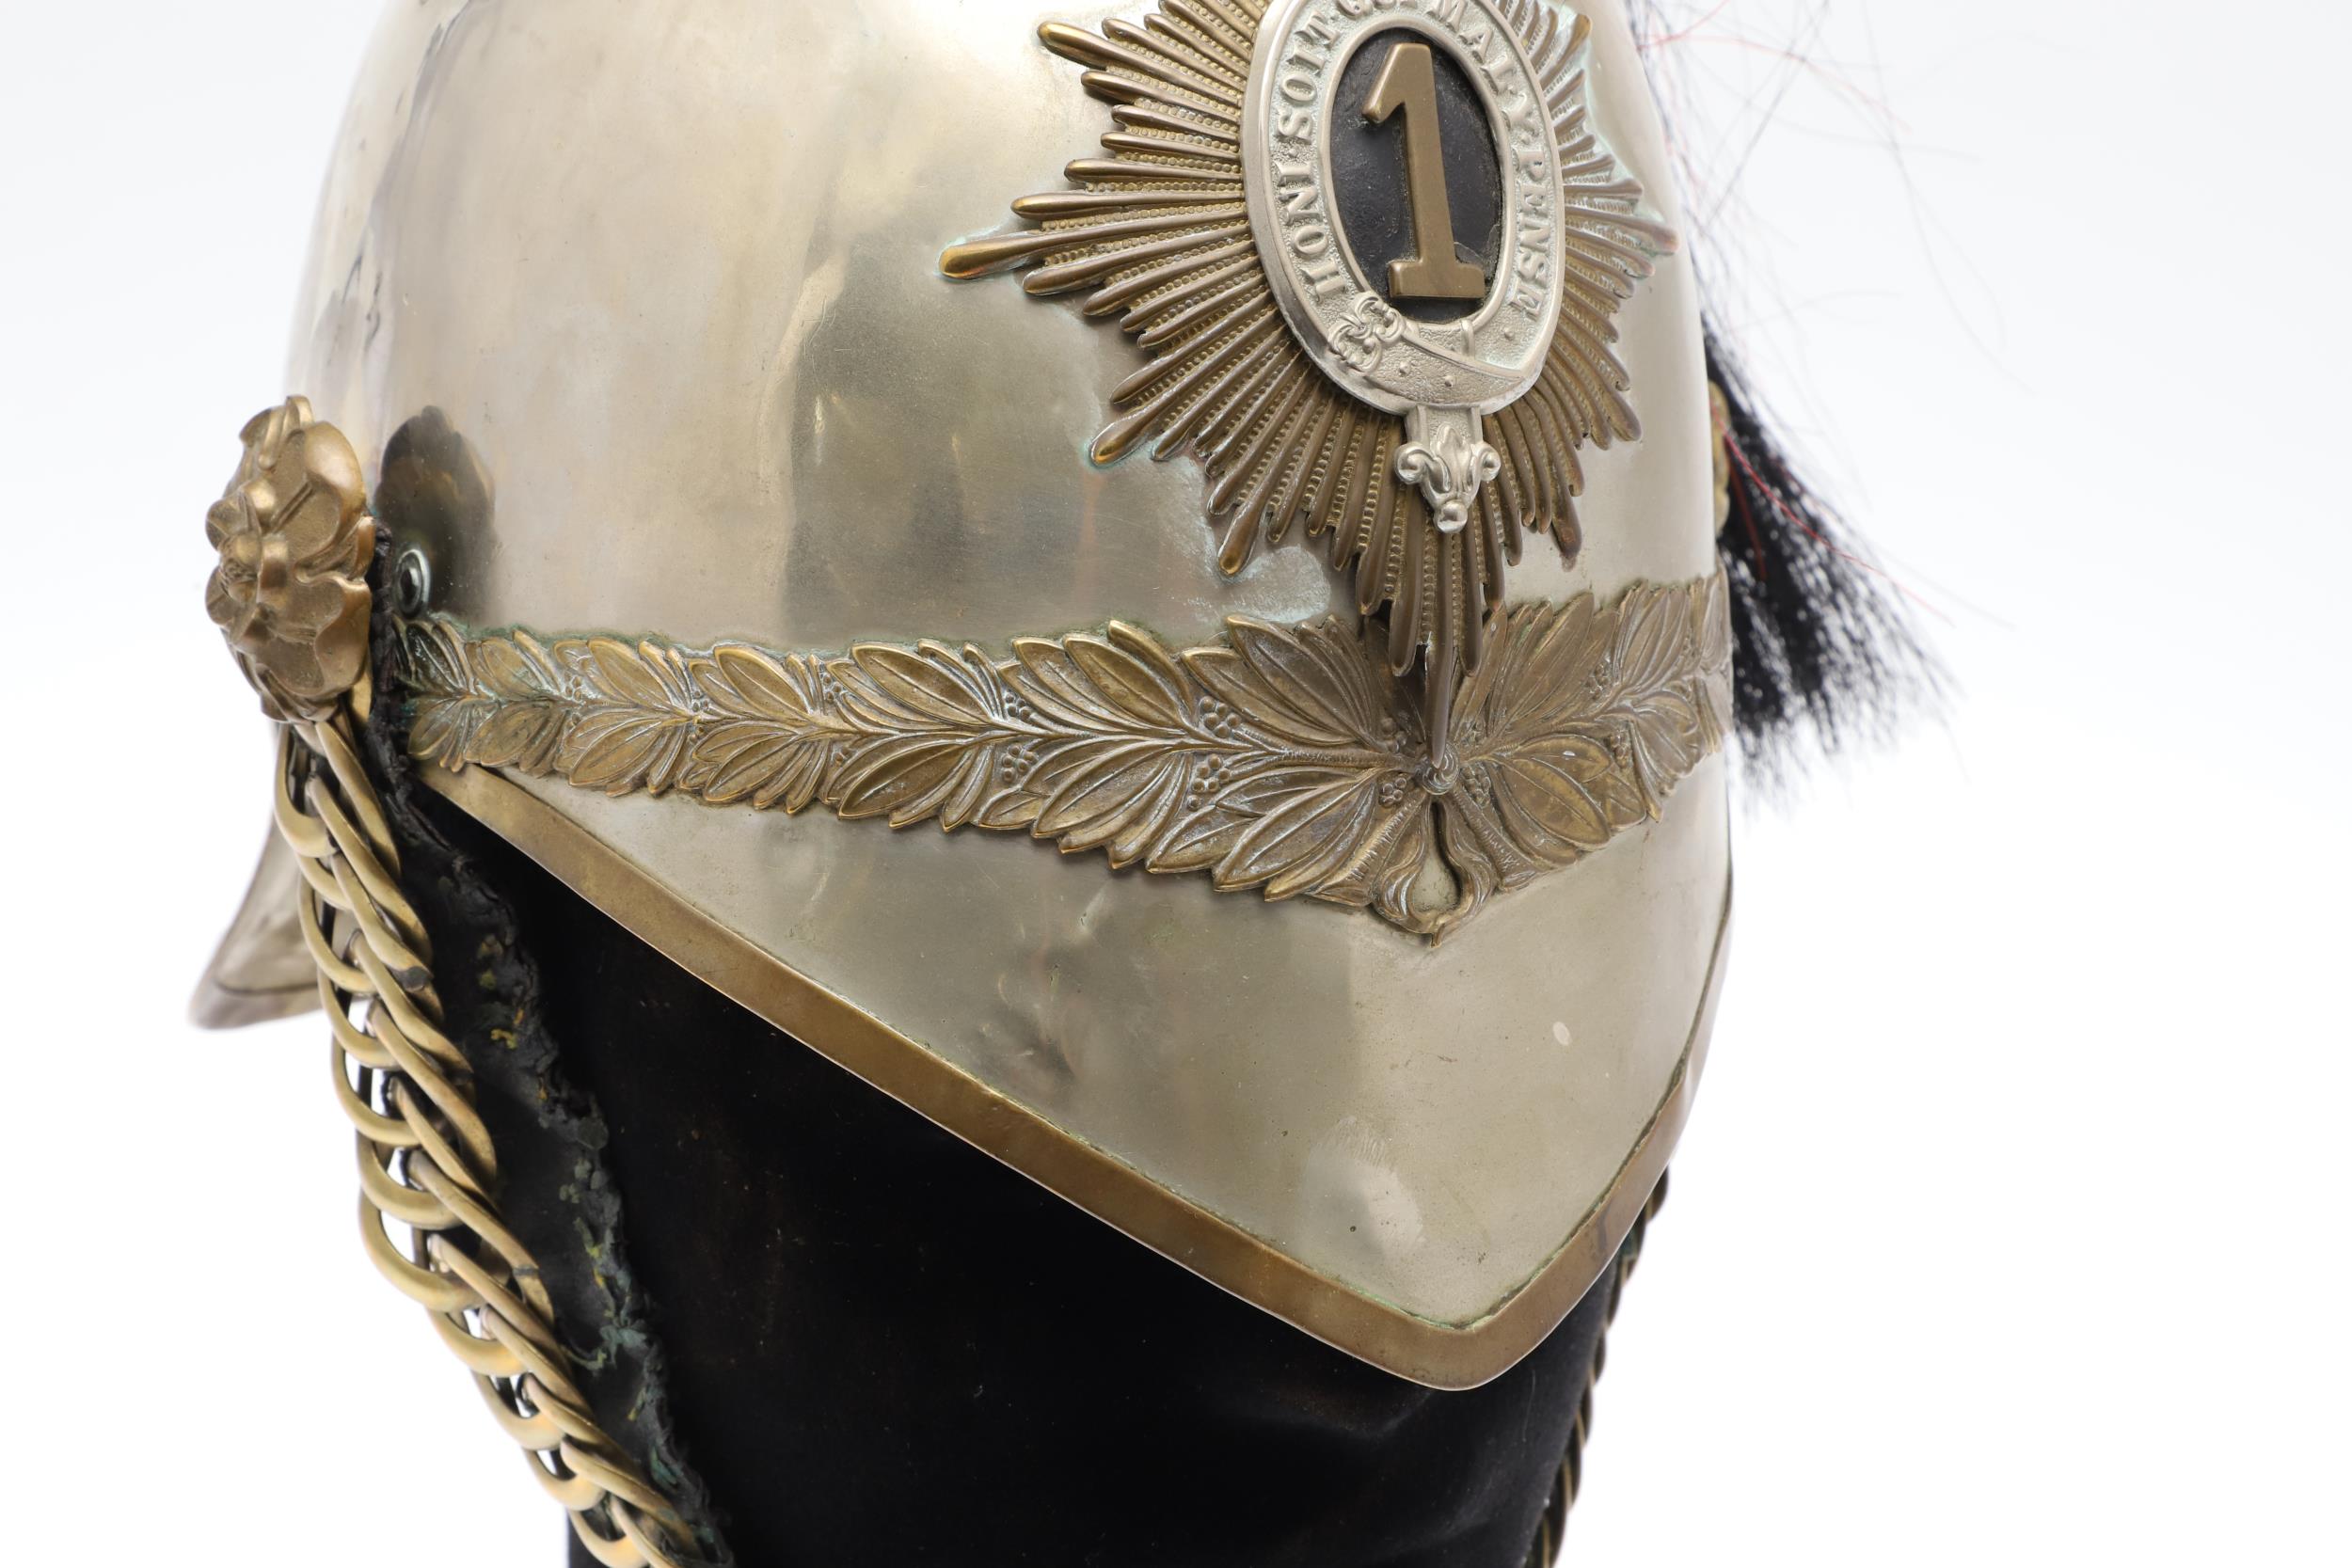 AN 1871 PATTERN HELMET WITH 1ST KING'S DRAGOON GUARDS HELMET PLATE. - Image 6 of 14